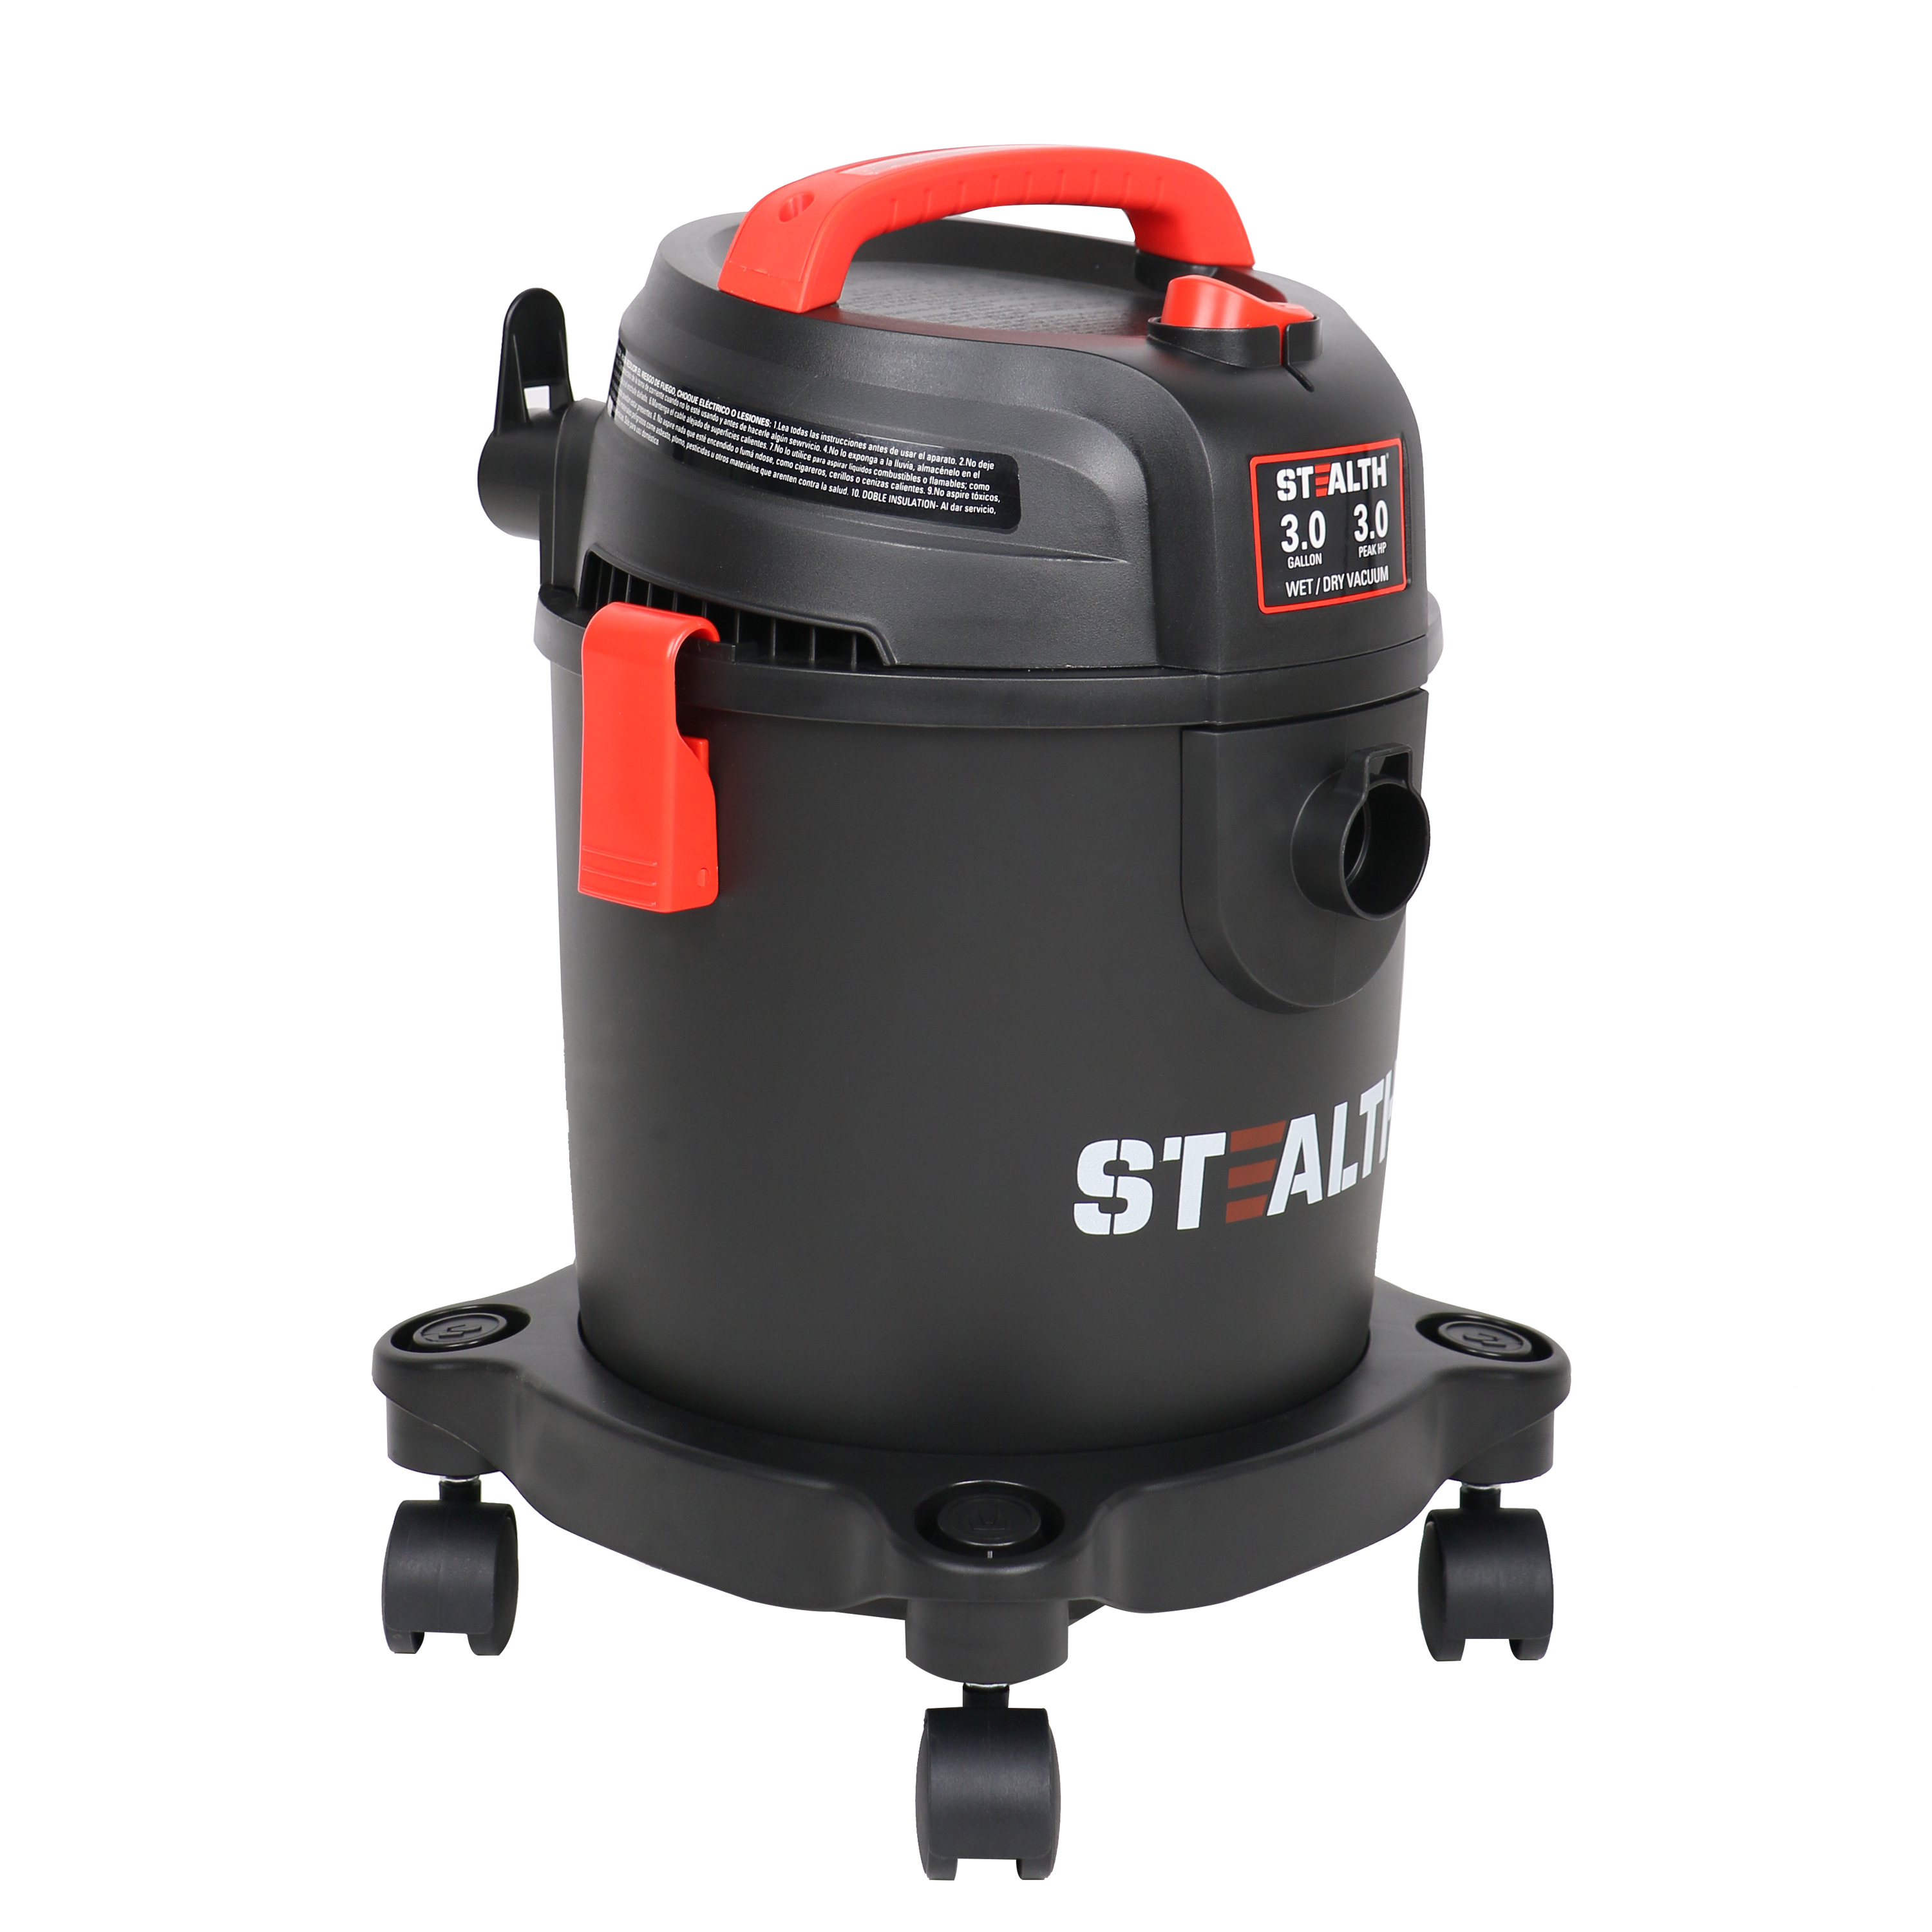 STEALTH 3 Gallon 3 Peak Horsepower Wet Dry Vacuum (AT18202P-3B) with Swiveling Casters - image 1 of 5